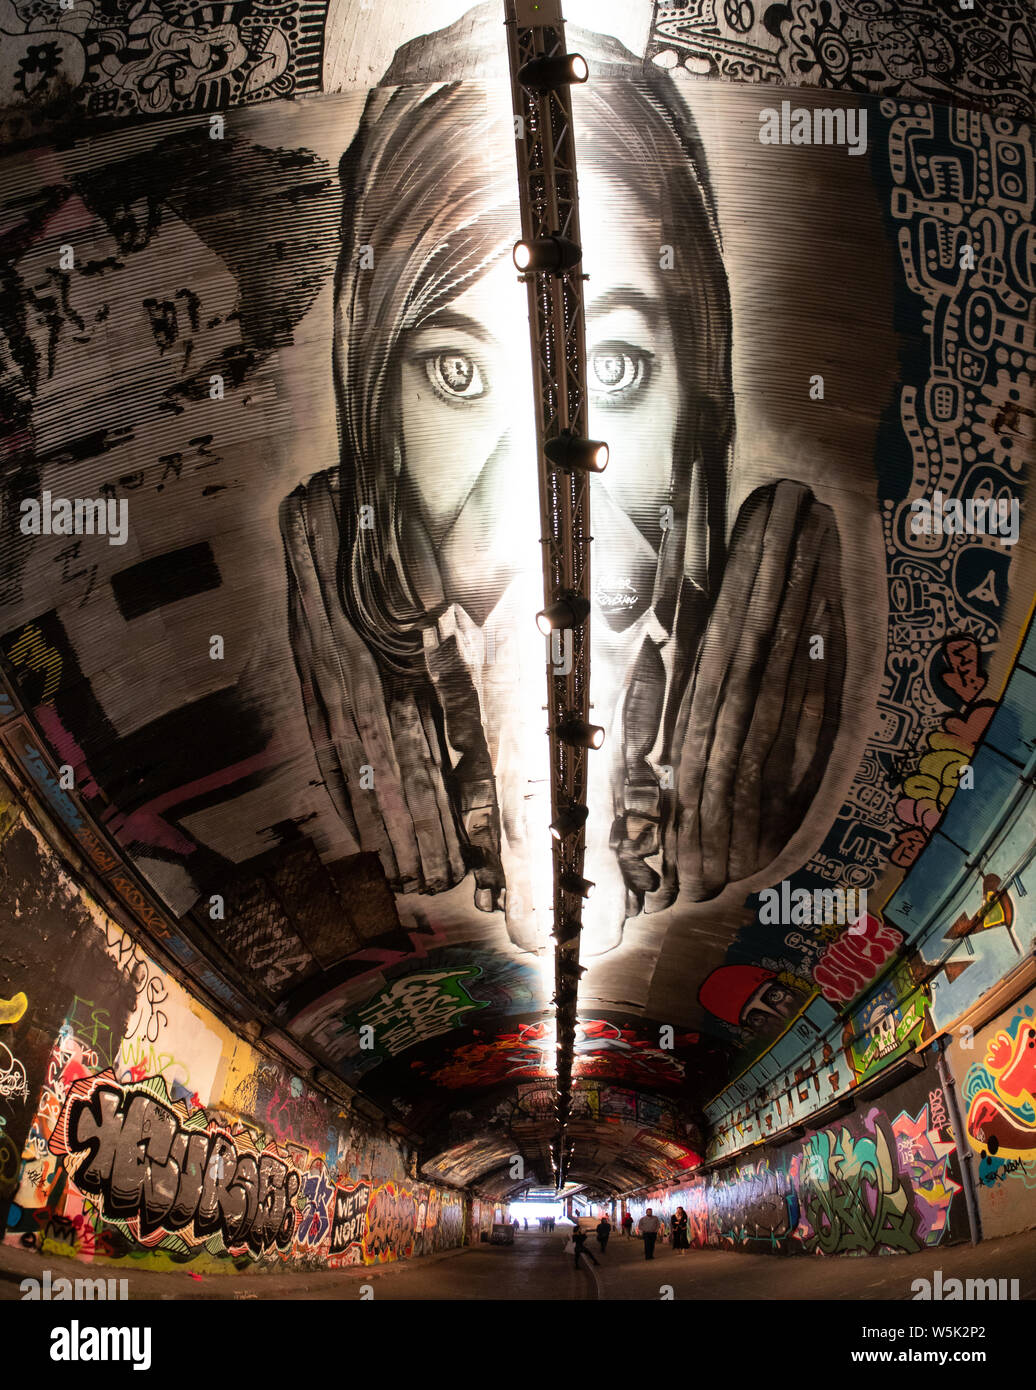 Graffiti in the Leake Street tunnel, Waterloo, London, including a large mural on the ceiling Stock Photo